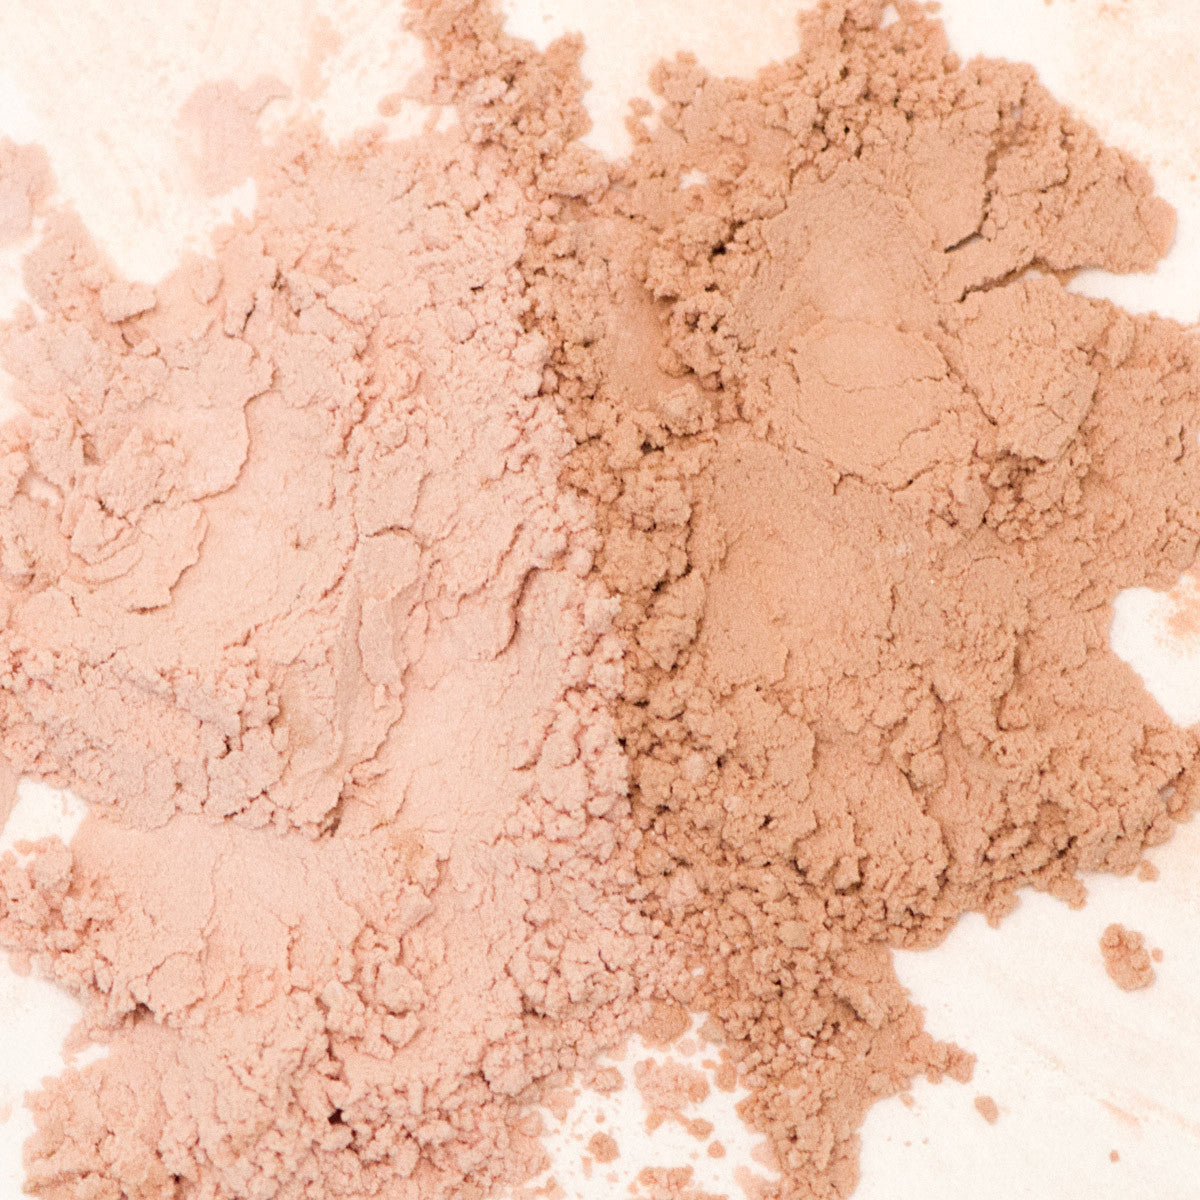 Beige Loose Translucent Face Powder (Also known as medium-light)